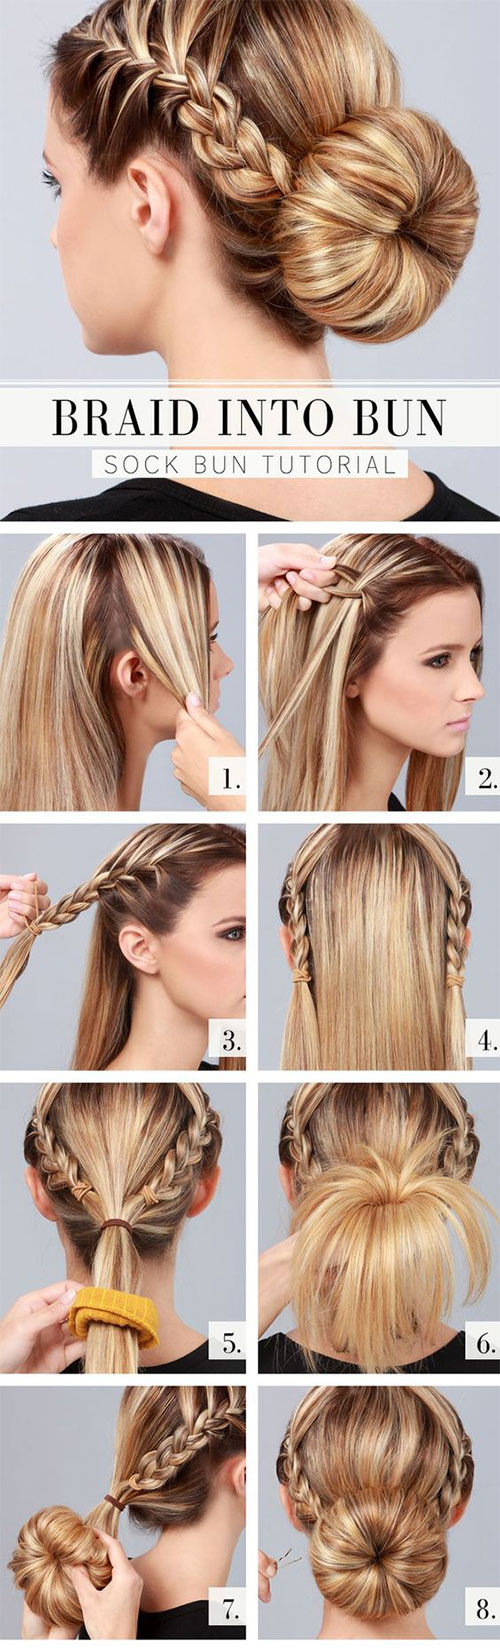 Easy Hairstyles For Beginners
 12 Easy Step By Step Summer Hairstyle Tutorials For